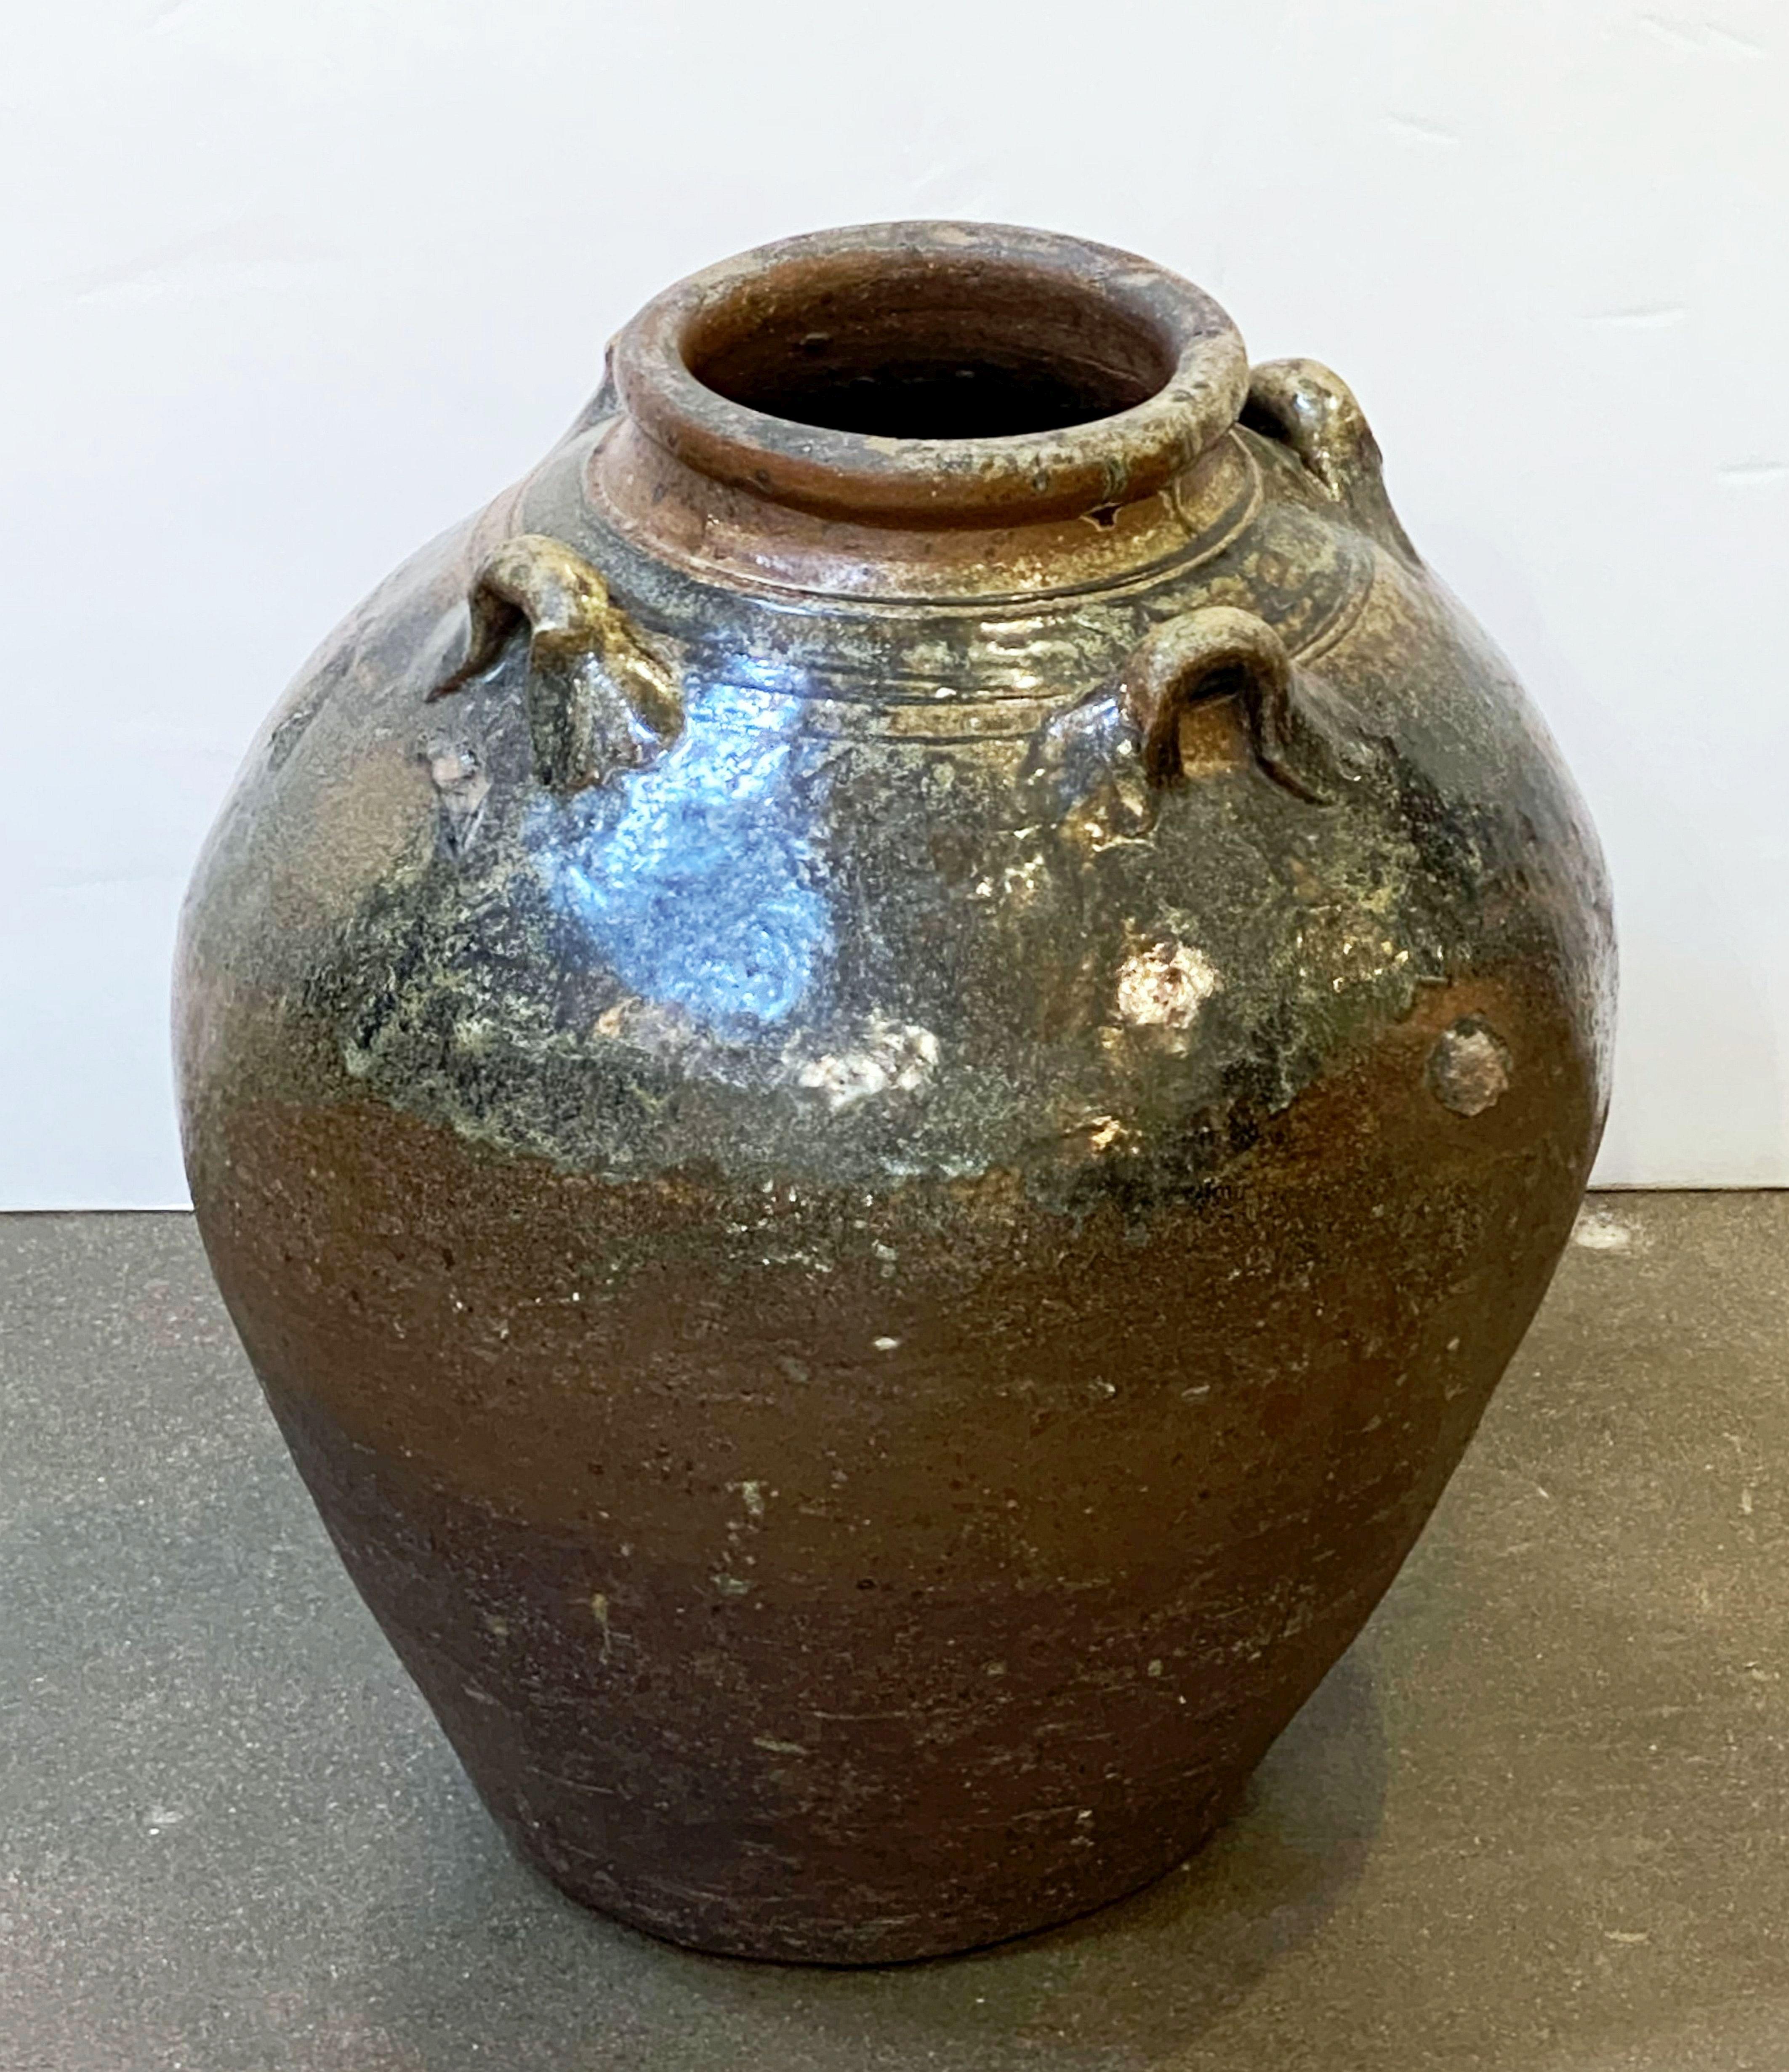 Glazed Ceramic Jug or Jar with Four Handles from France In Good Condition For Sale In Austin, TX